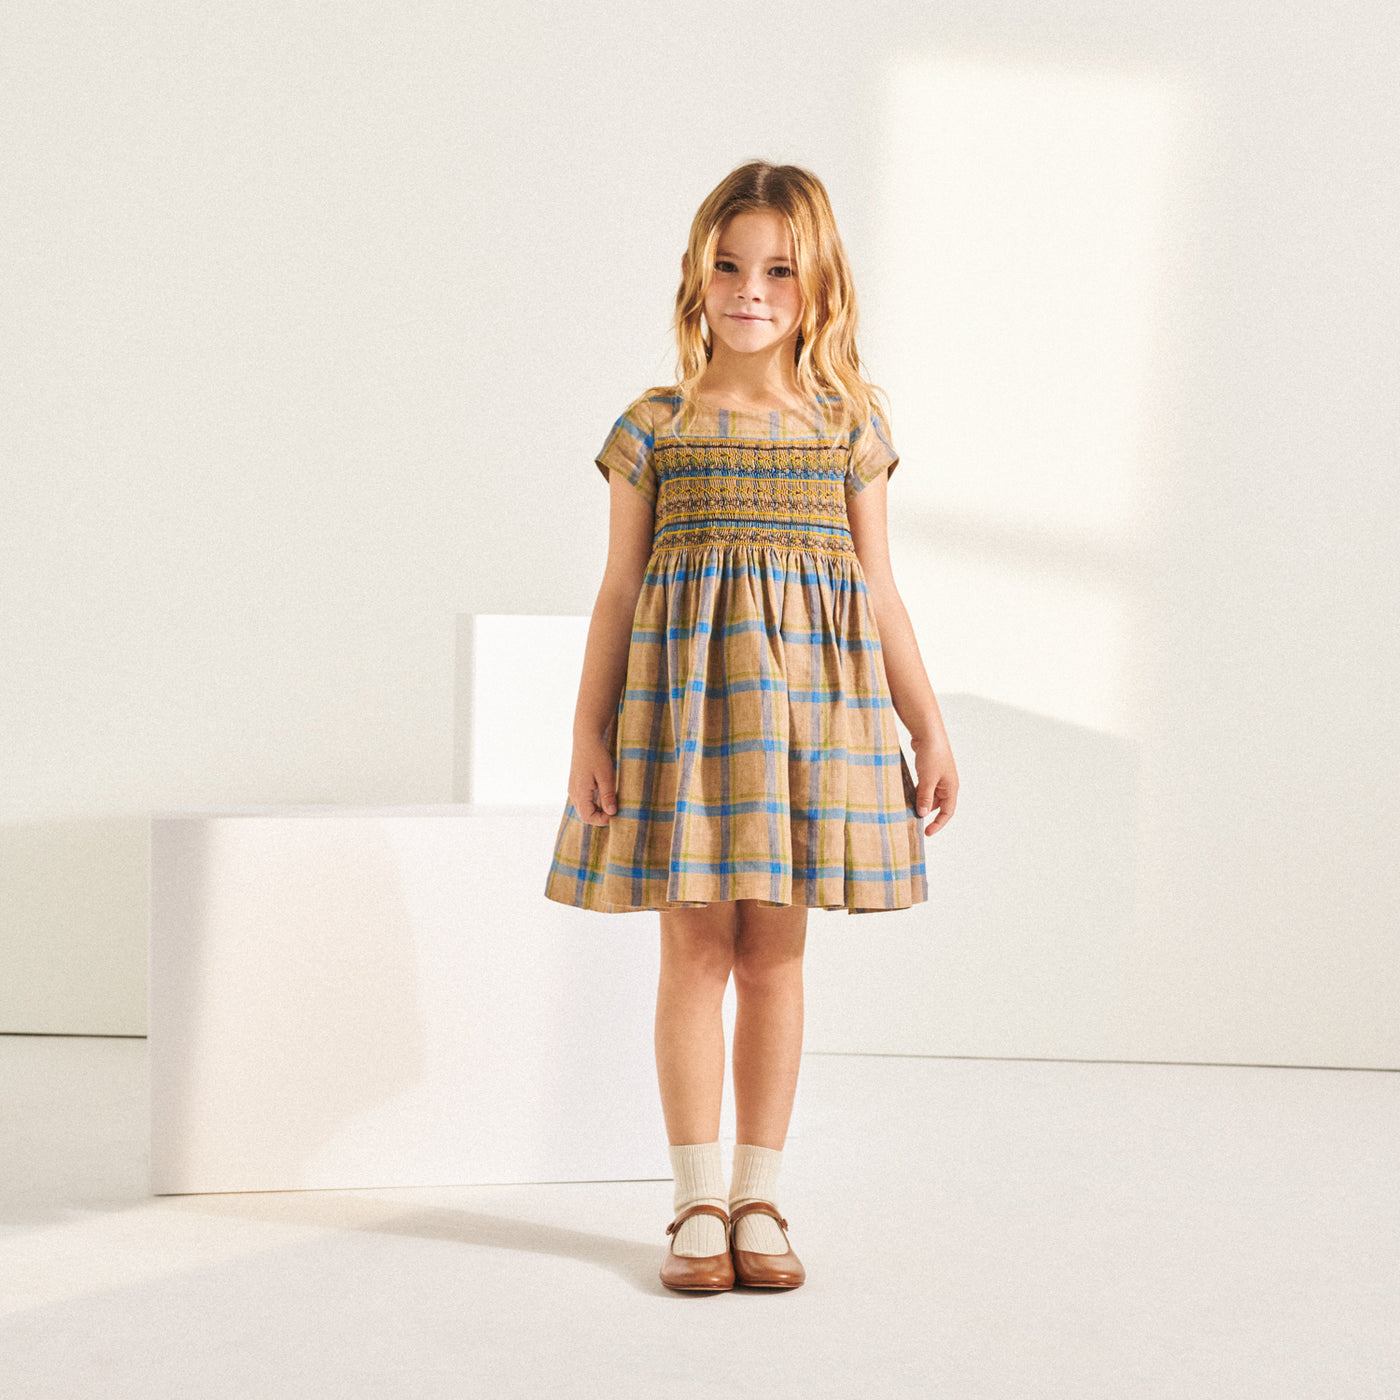 Girl standing in orange and blue plaid dress from Bonpoint Spring Summer 2022 Collection